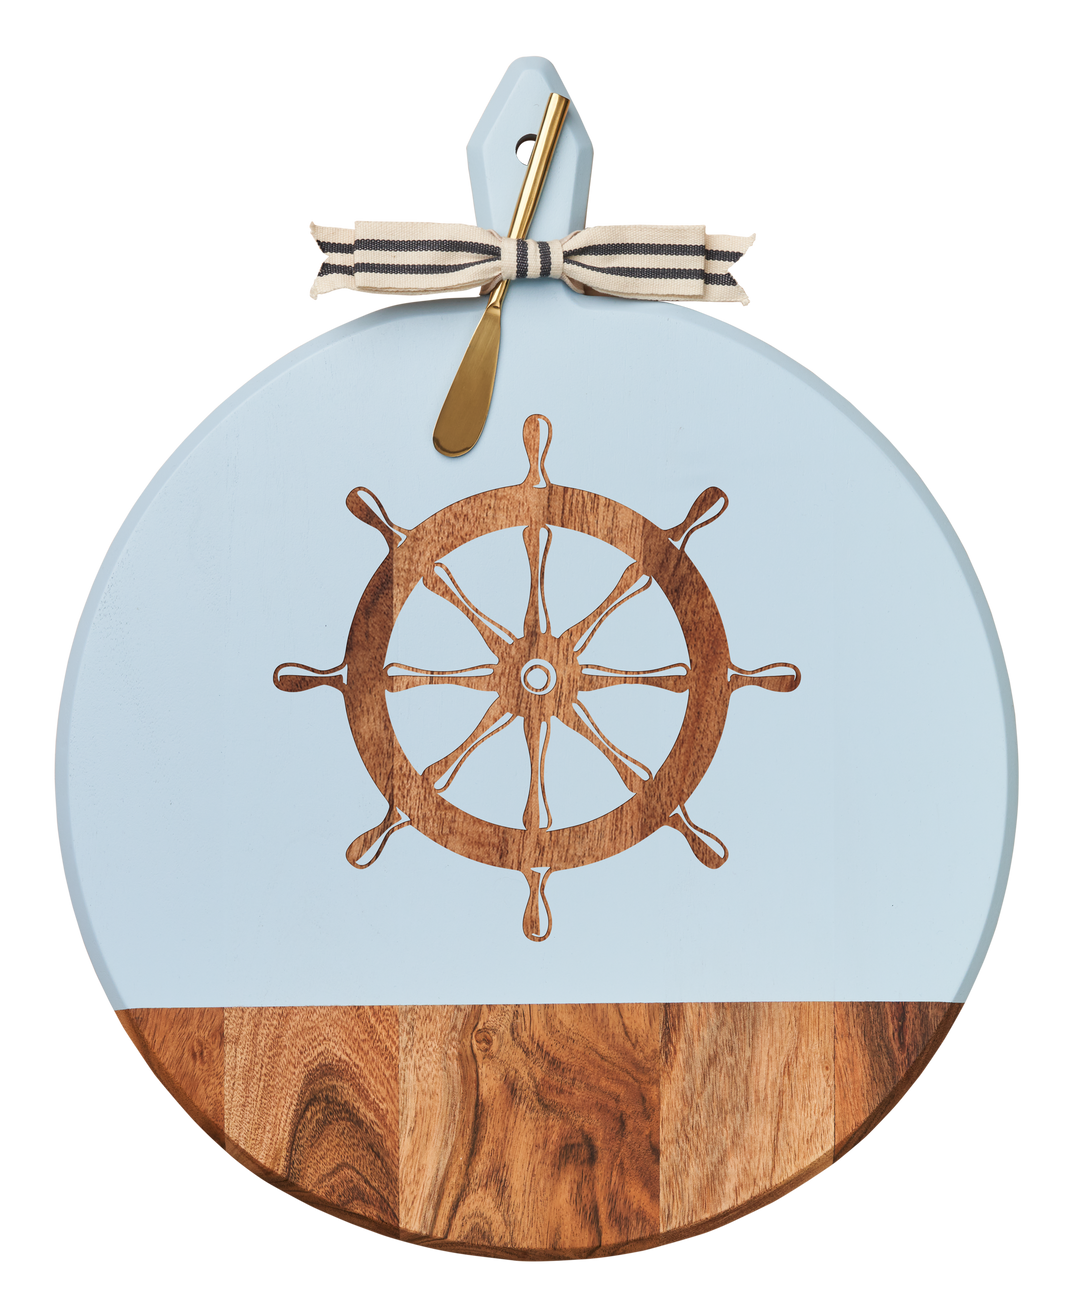 Acacia Heirloom Board with Handle Round & Gold Spreader Tied with Gray & White Ribbon | Helm | 20 x 16"